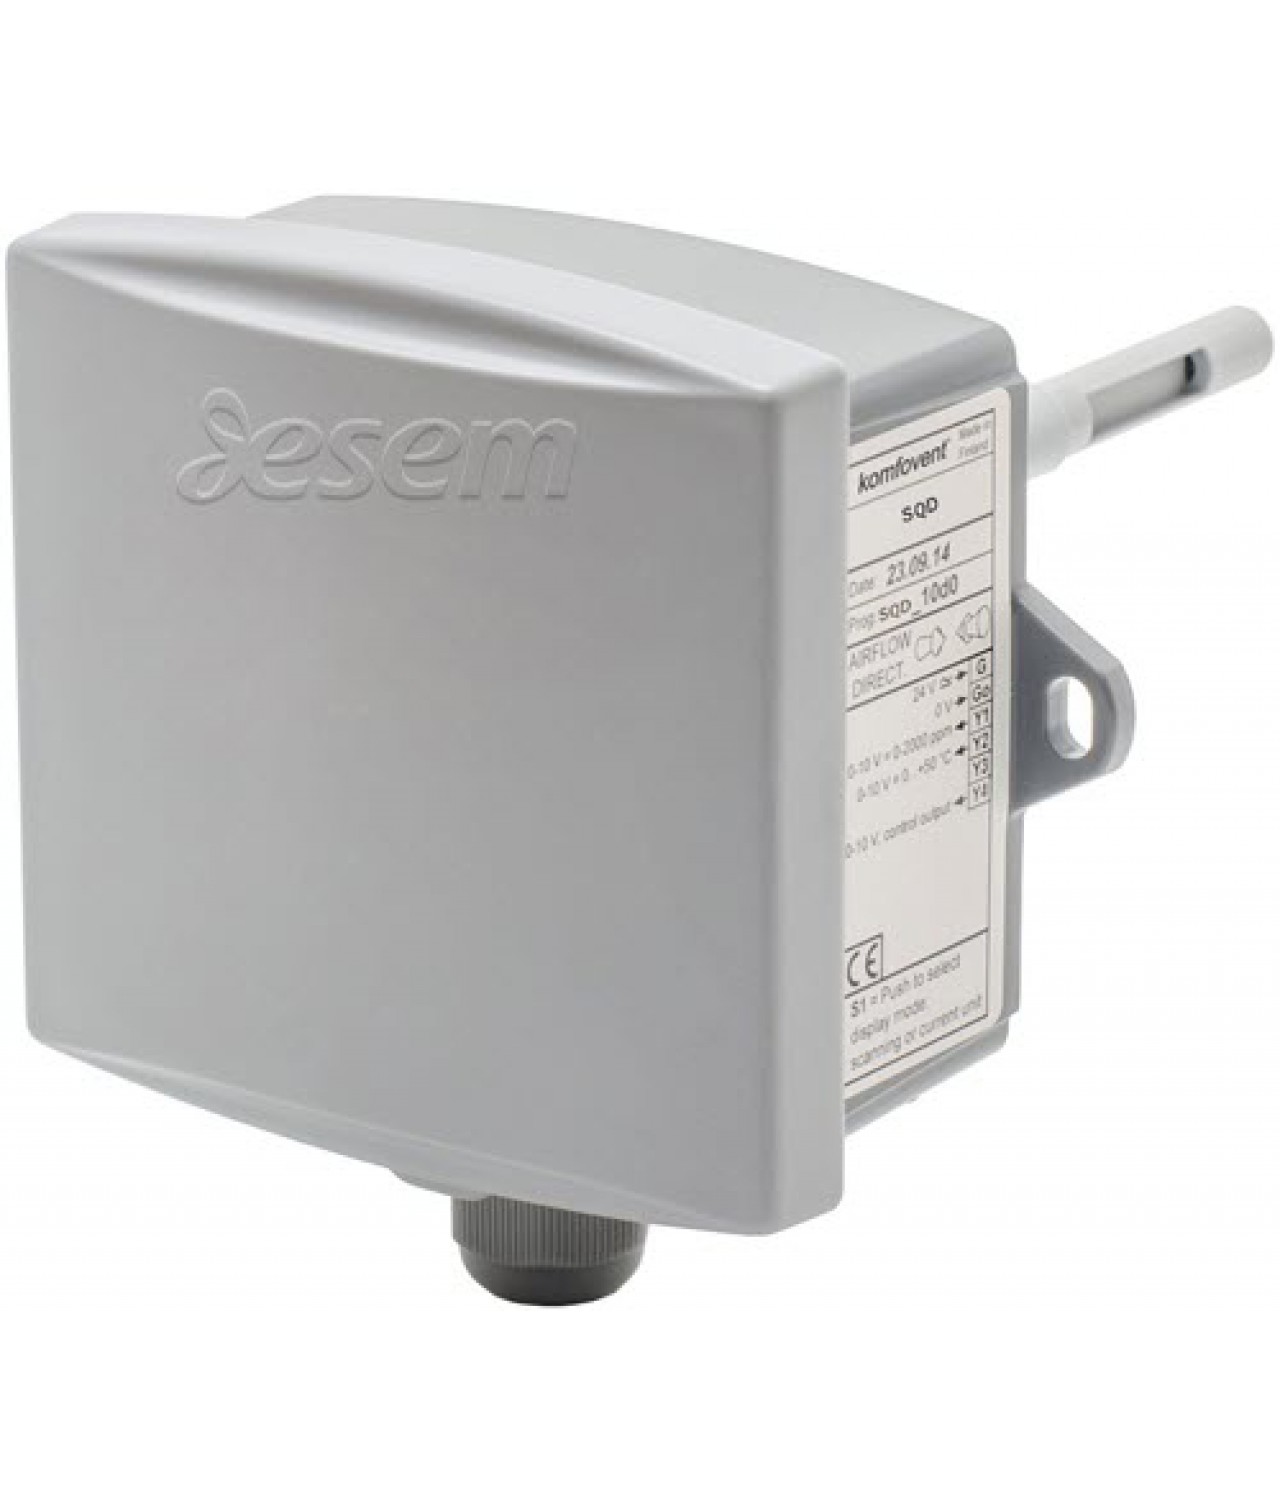 SQD - duct air quality and temperature sensor